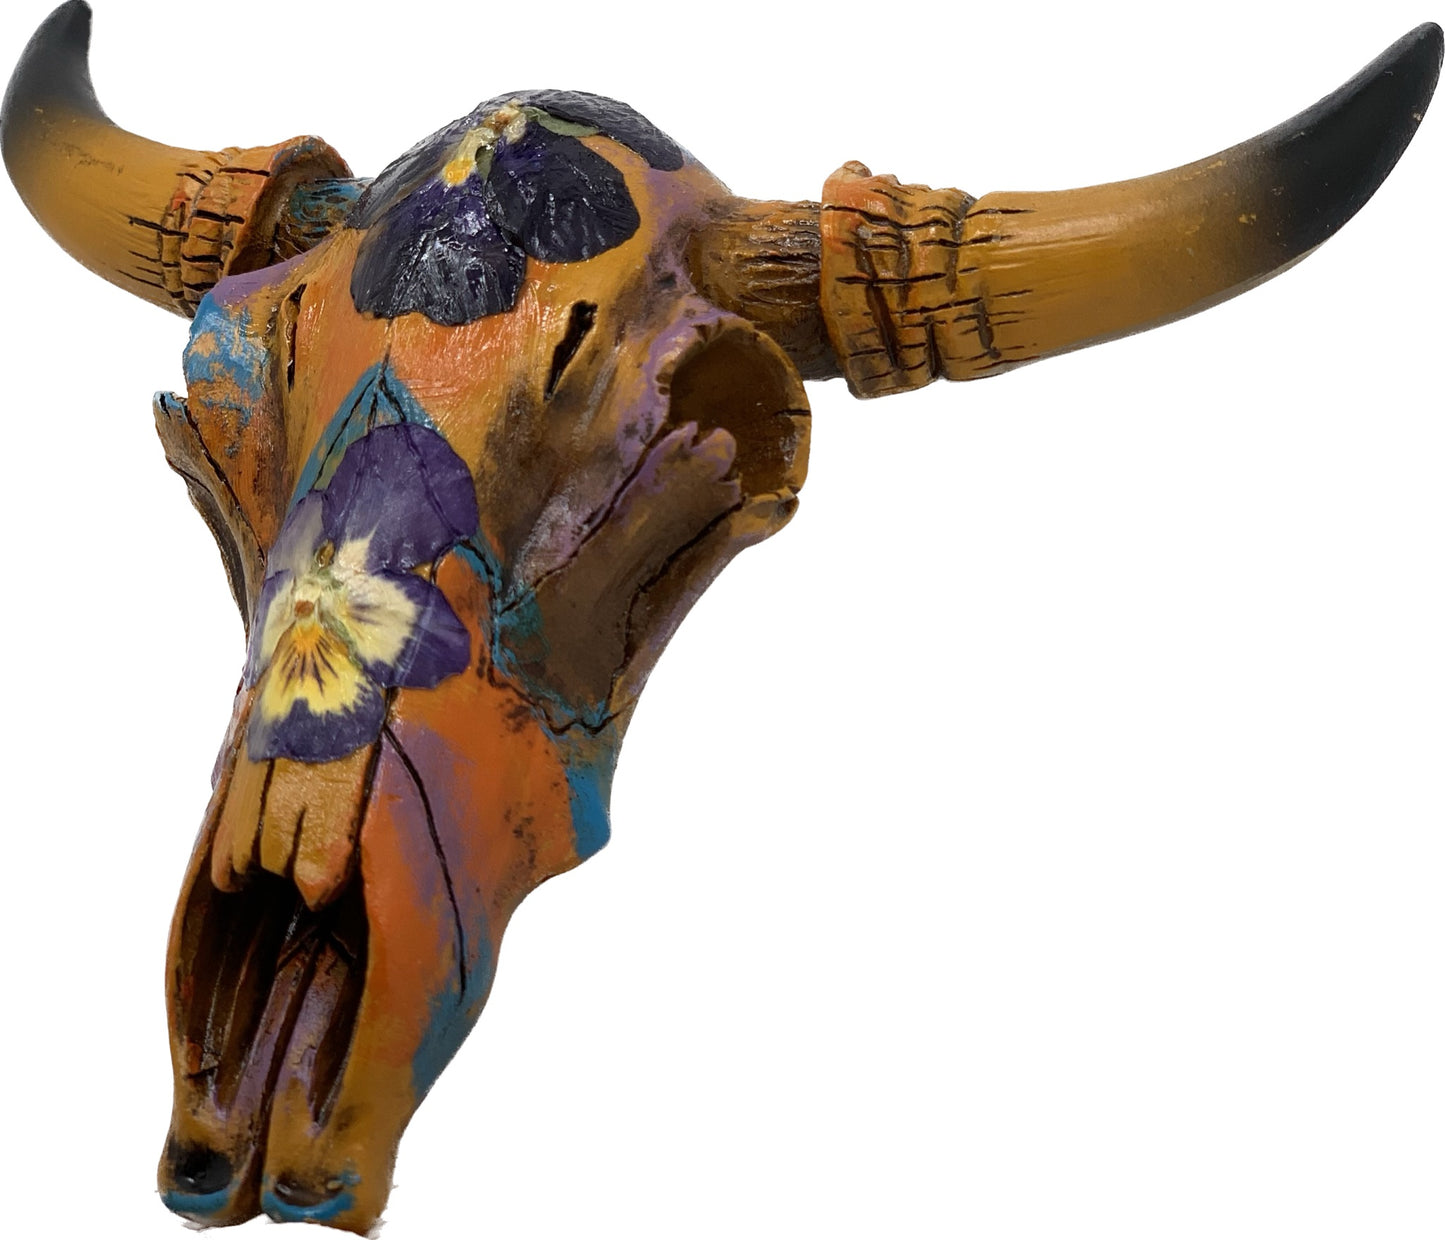 Pansy Cow Skull - Size Small